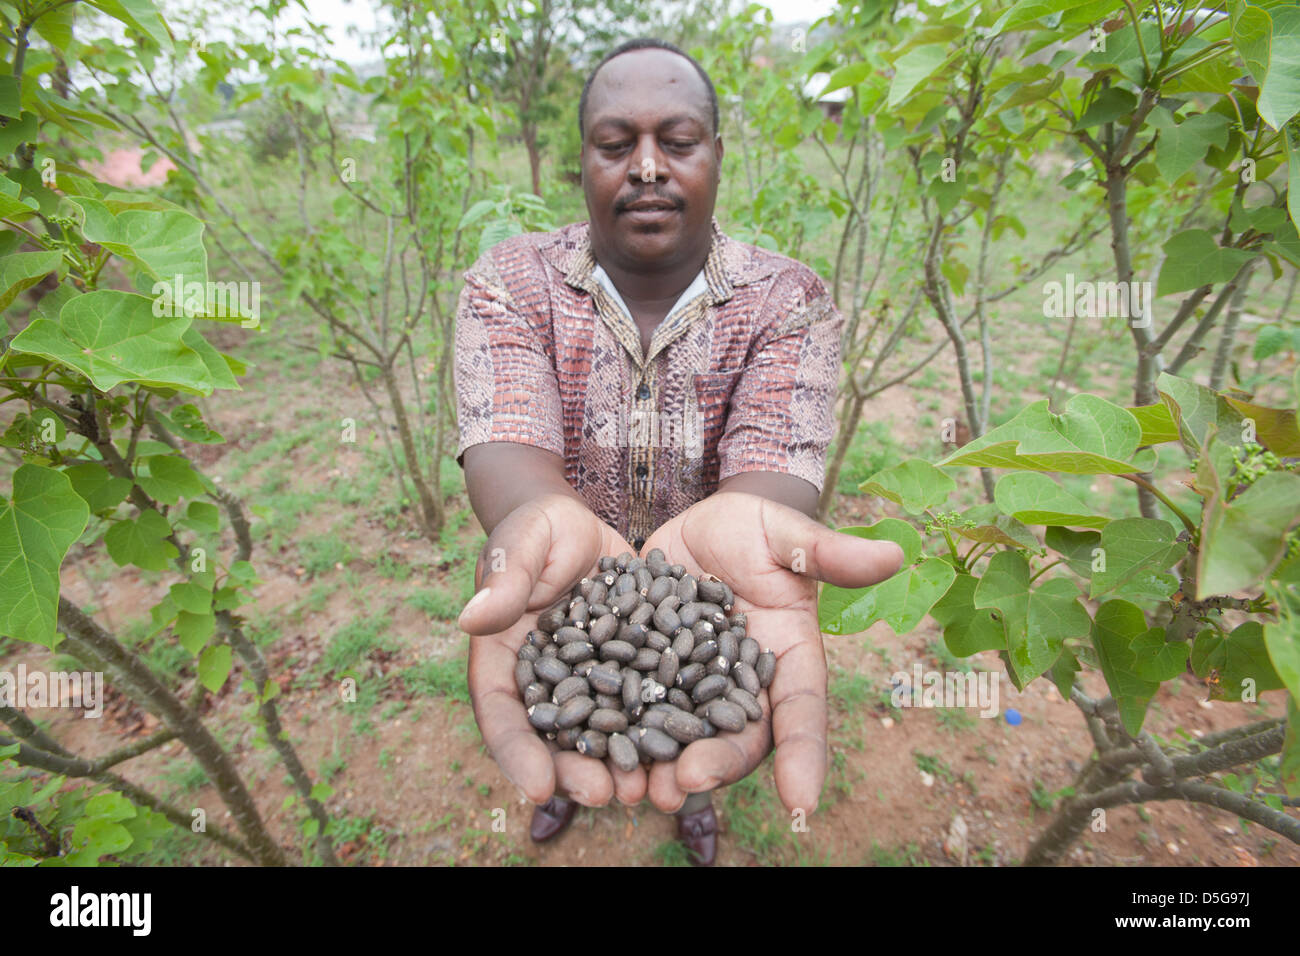 Farmer holding Jatropha beans (used for making biofuel) in a field of Jatropha plants, Tanzania. Stock Photo